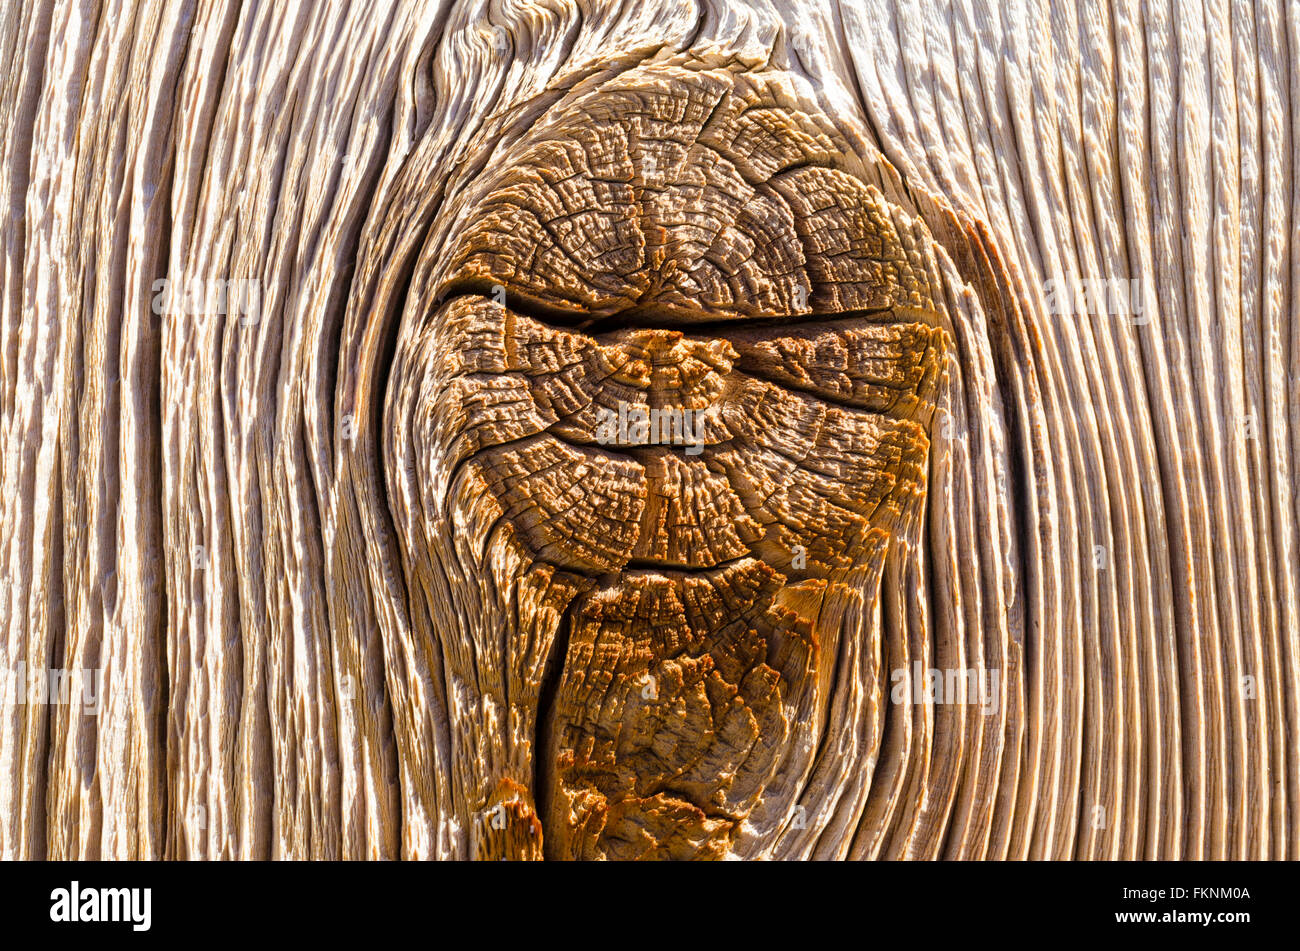 Aged wooden fence plank with knot, close up board show coarse rough wood grain. Stock Photo